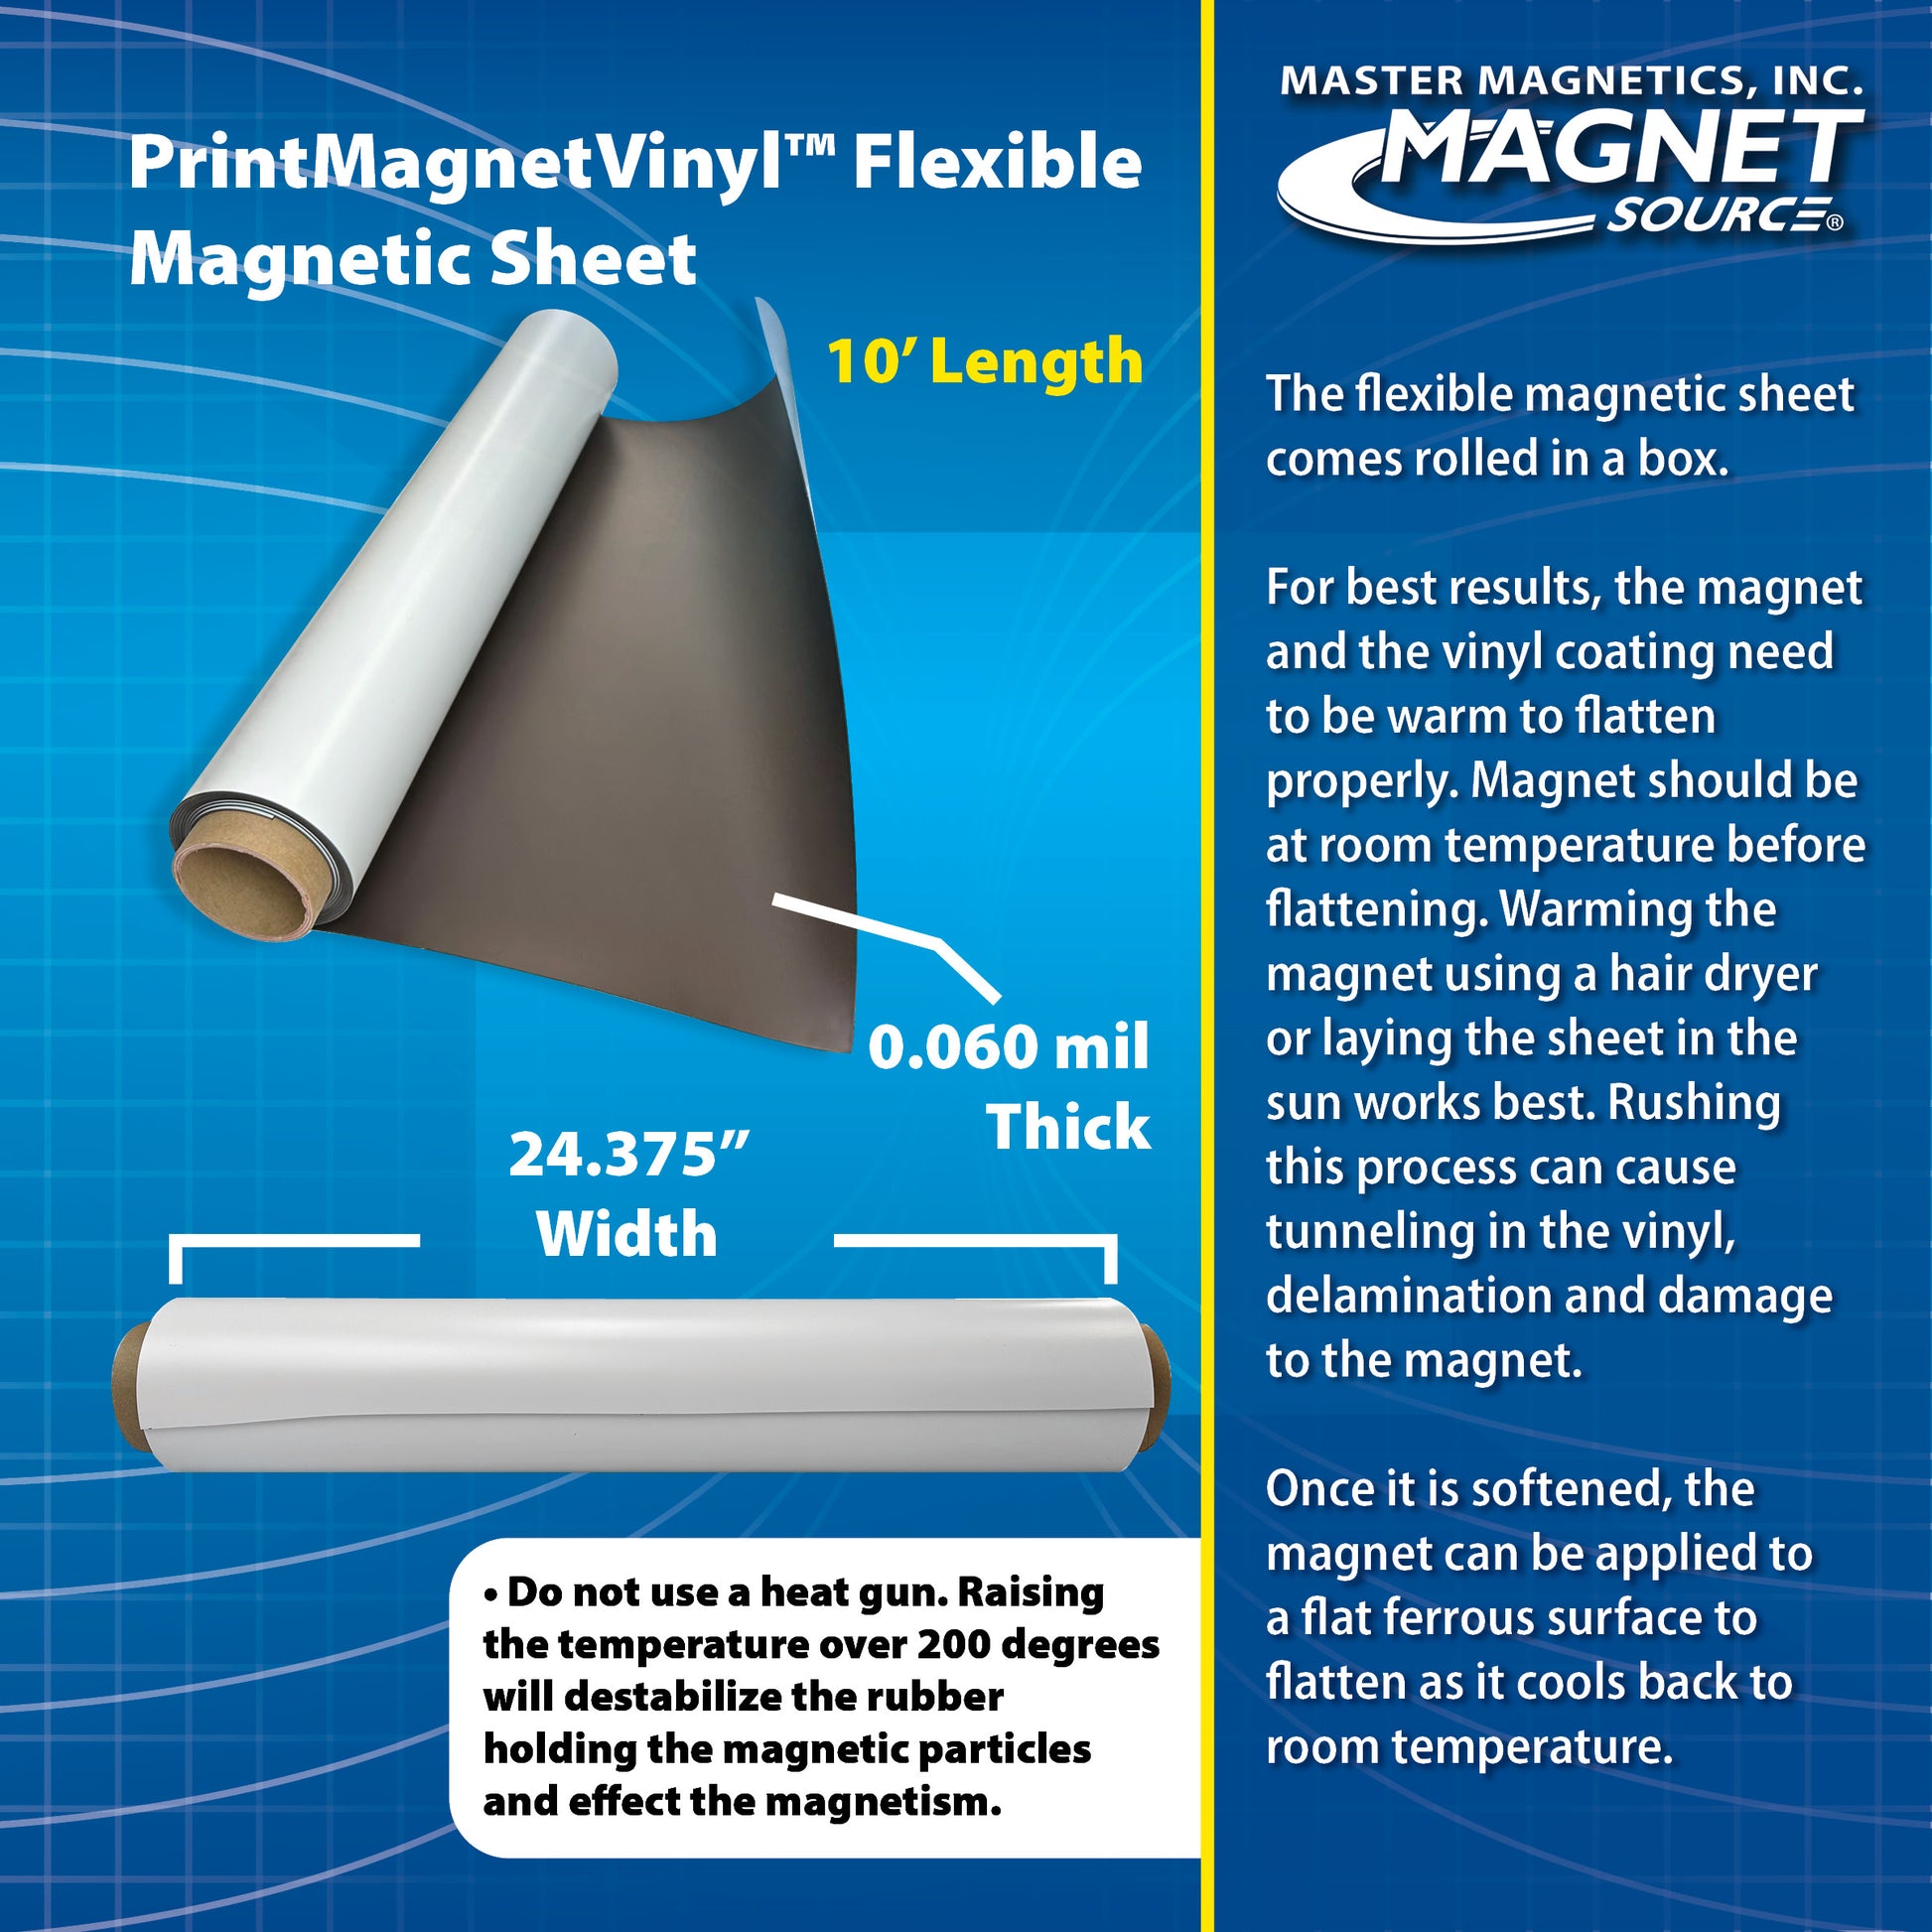 Load image into Gallery viewer, ZGN6024GW10 PrintMagnetVinyl™ Flexible Magnetic Sheet - Specifications